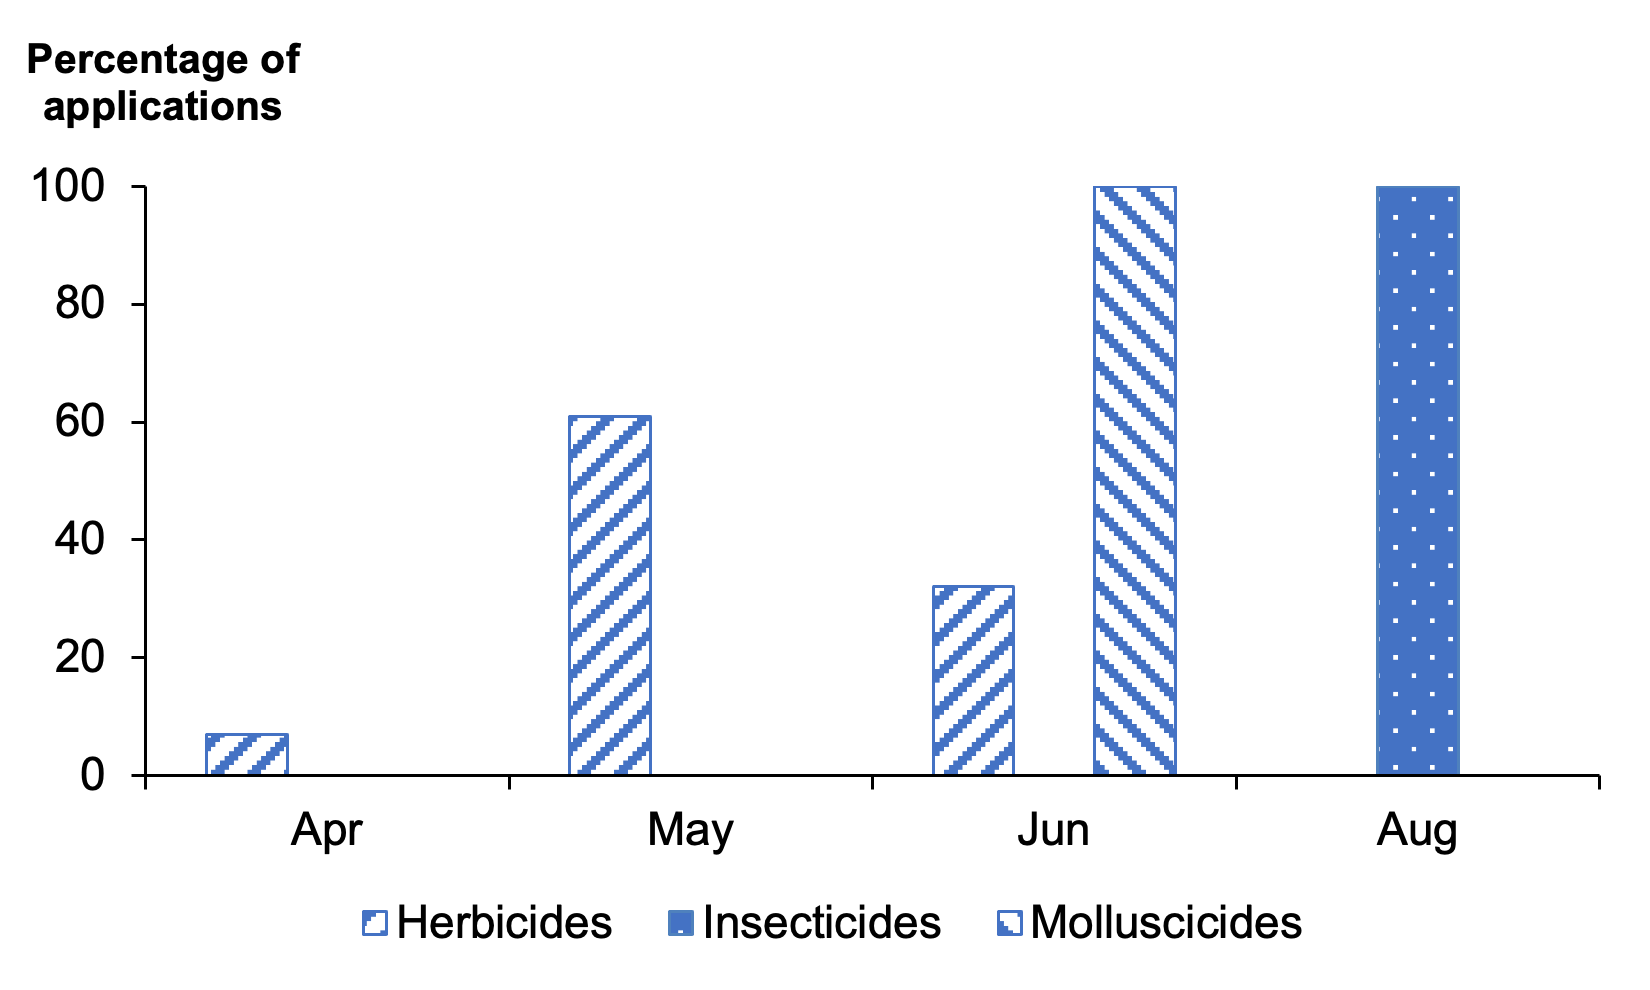 Bar chart of percentage of pesticide applications on kale and cabbage by month where most applications are in June and August 2021.